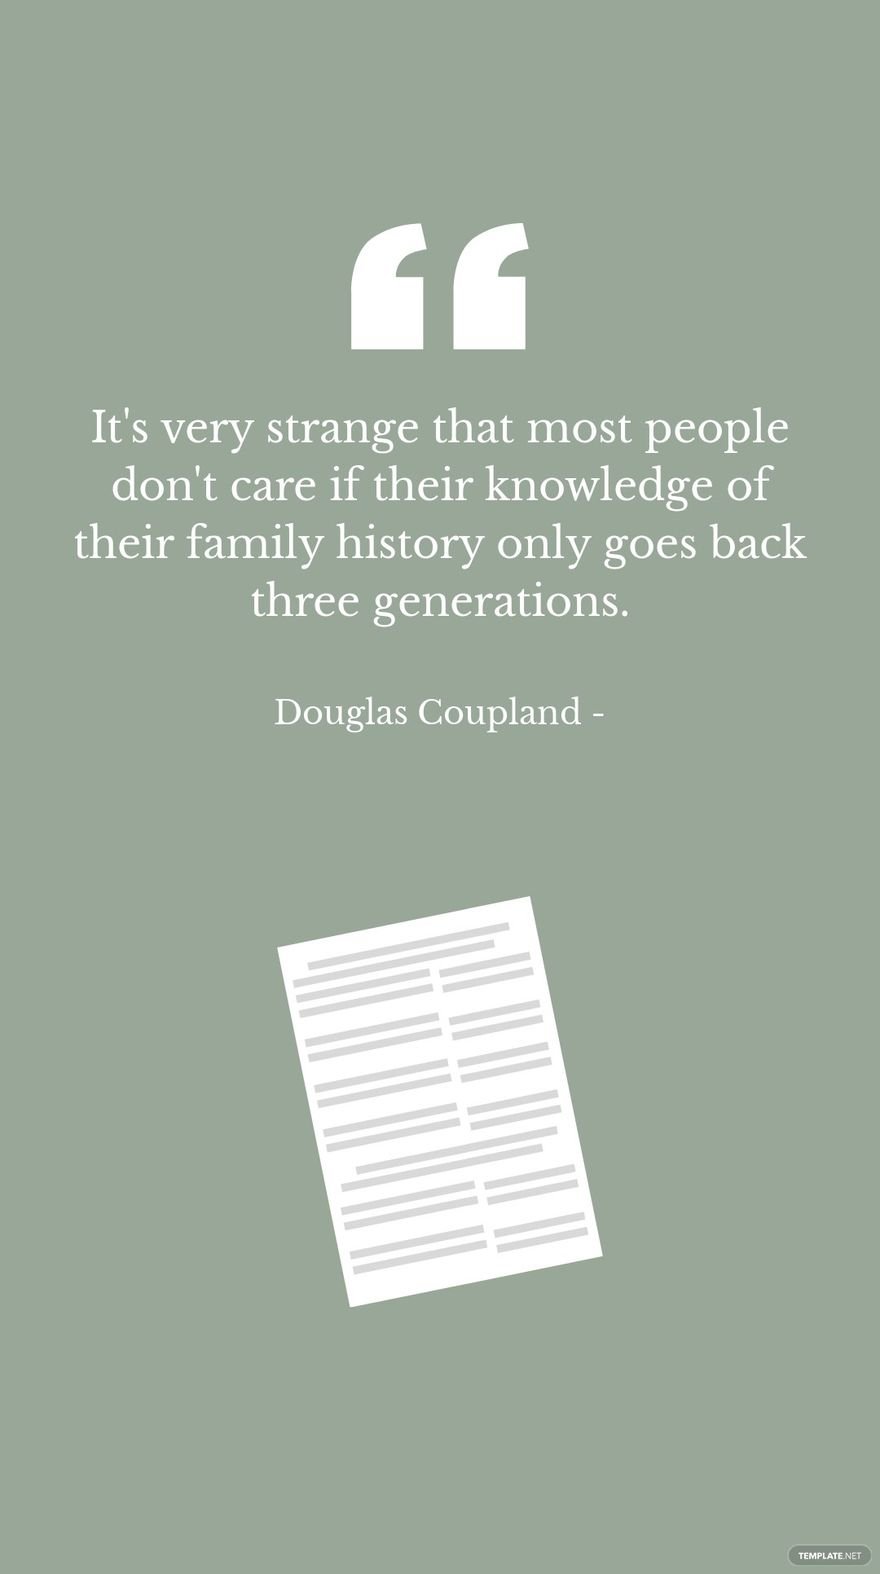 Douglas Coupland - It's very strange that most people don't care if their knowledge of their family history only goes back three generations.